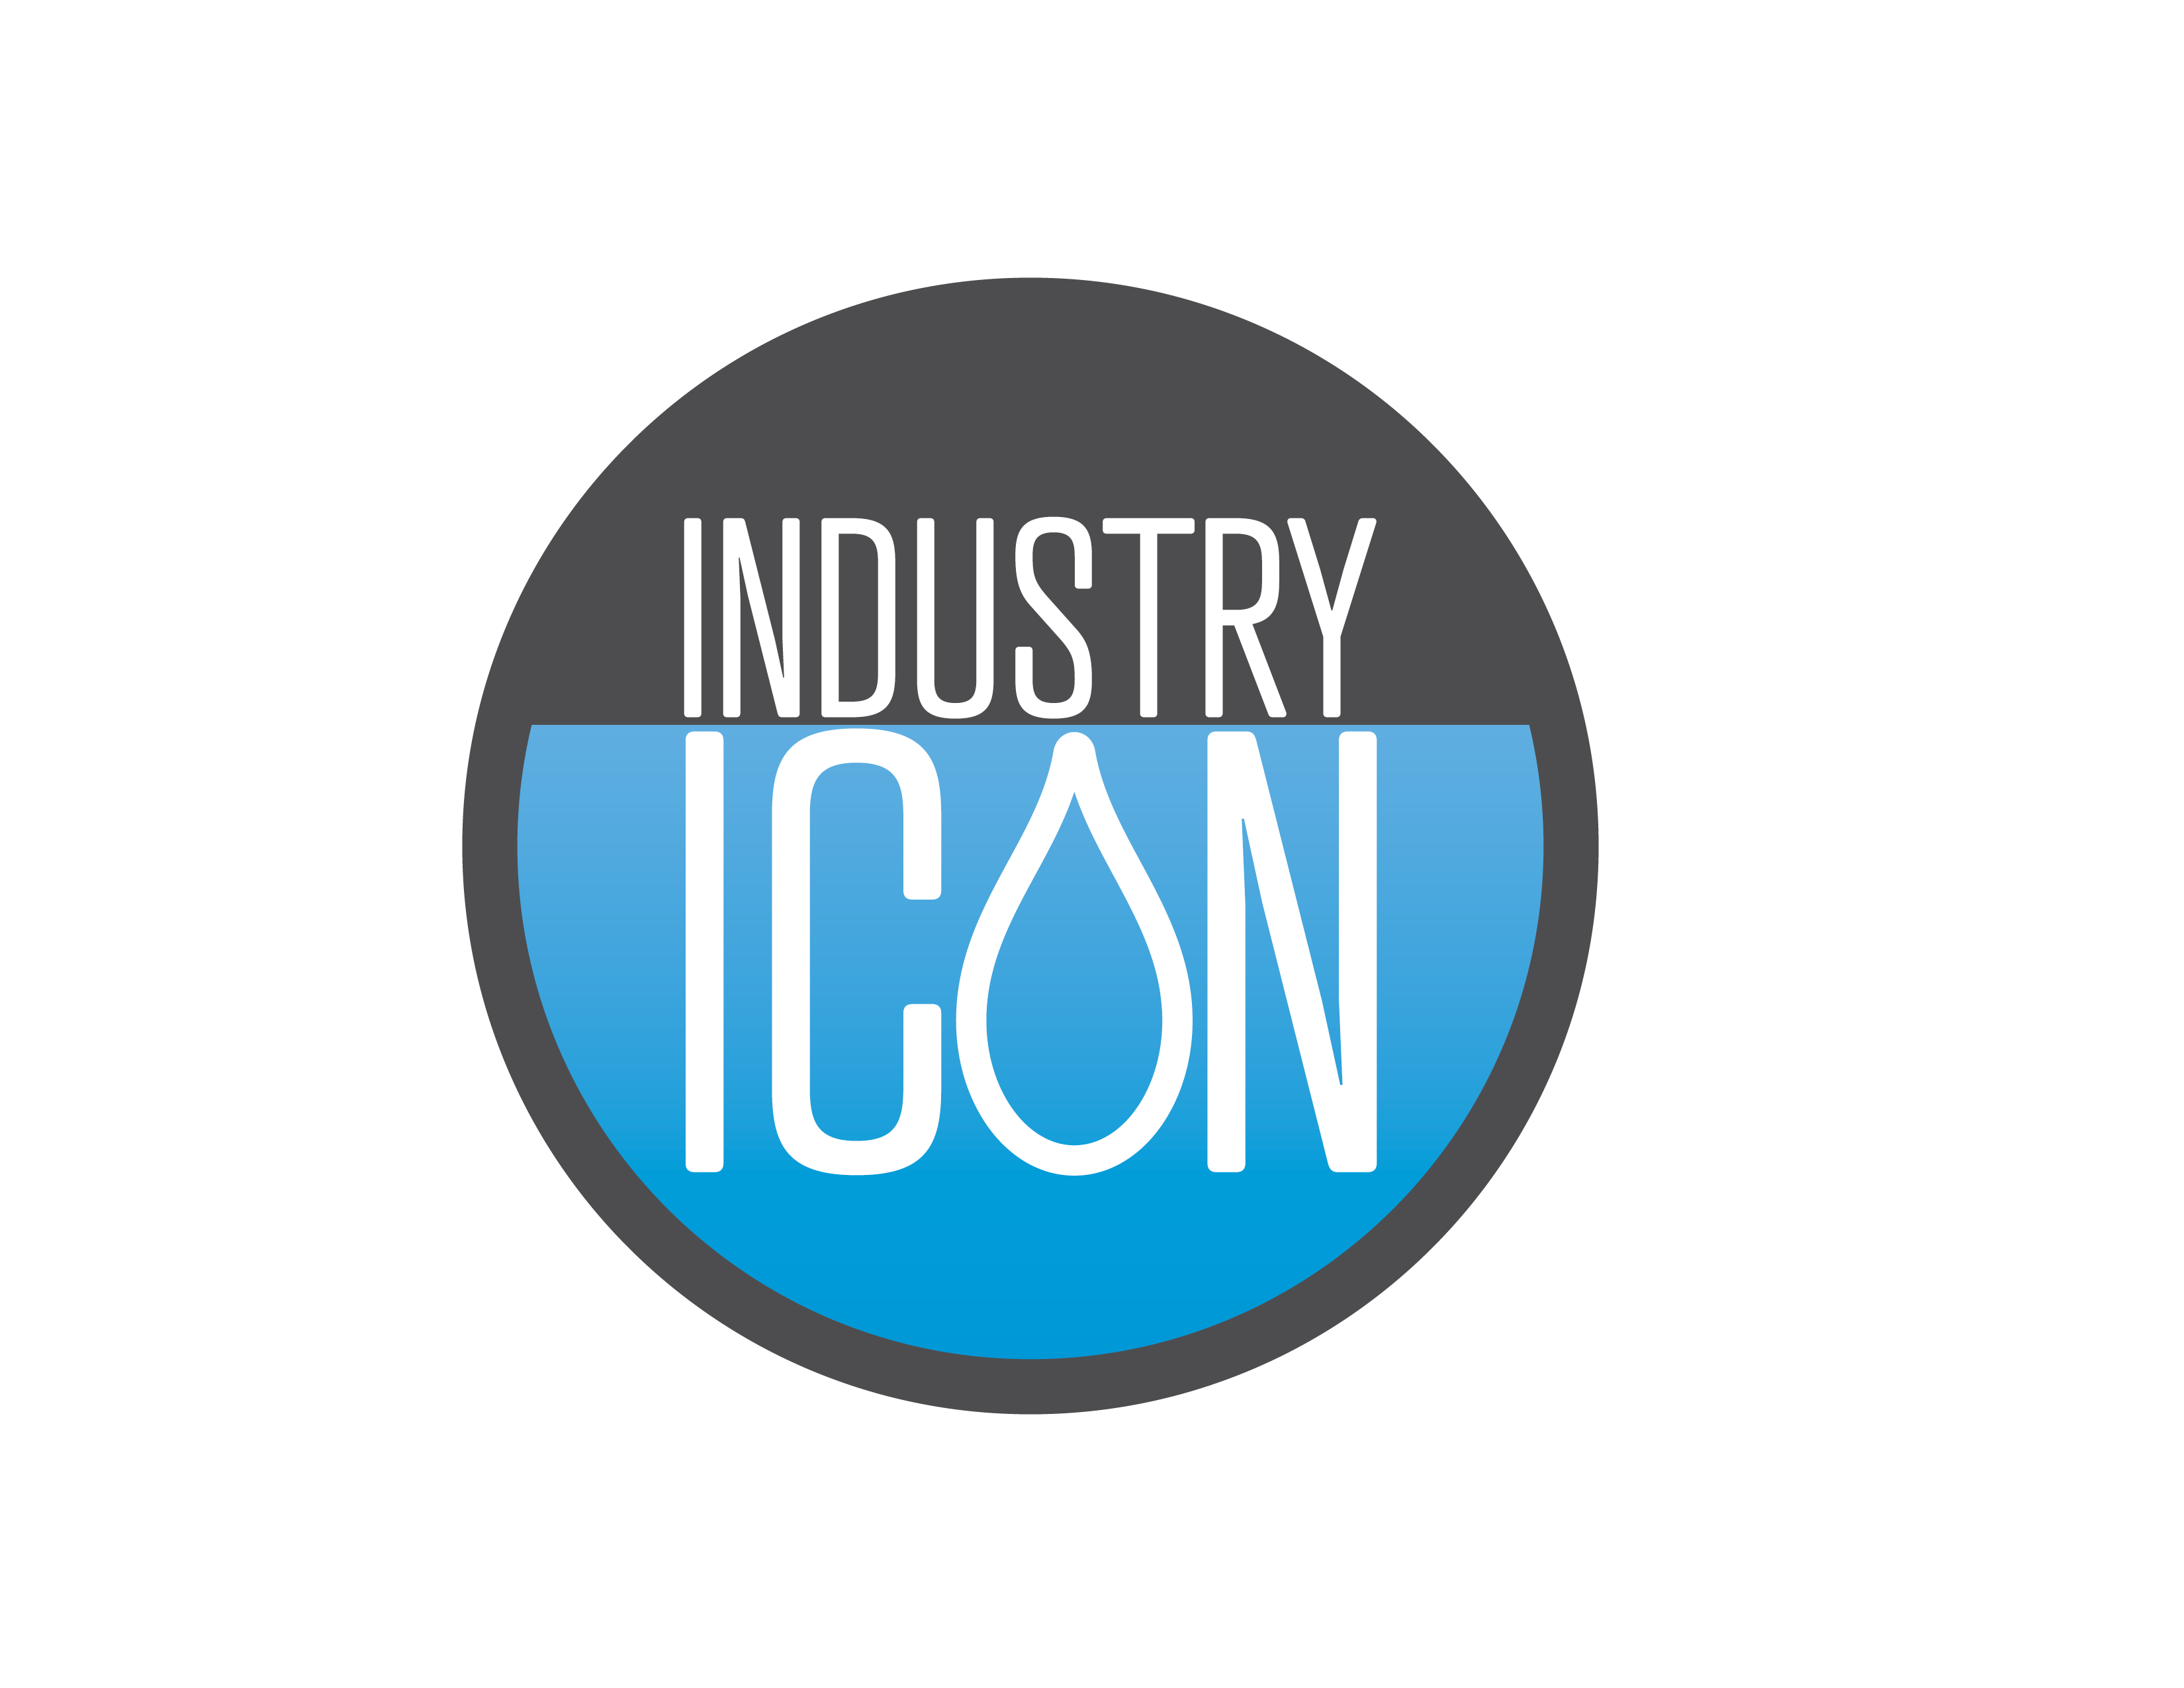 Industry with Blue Circle Logo - Industry Icon Award